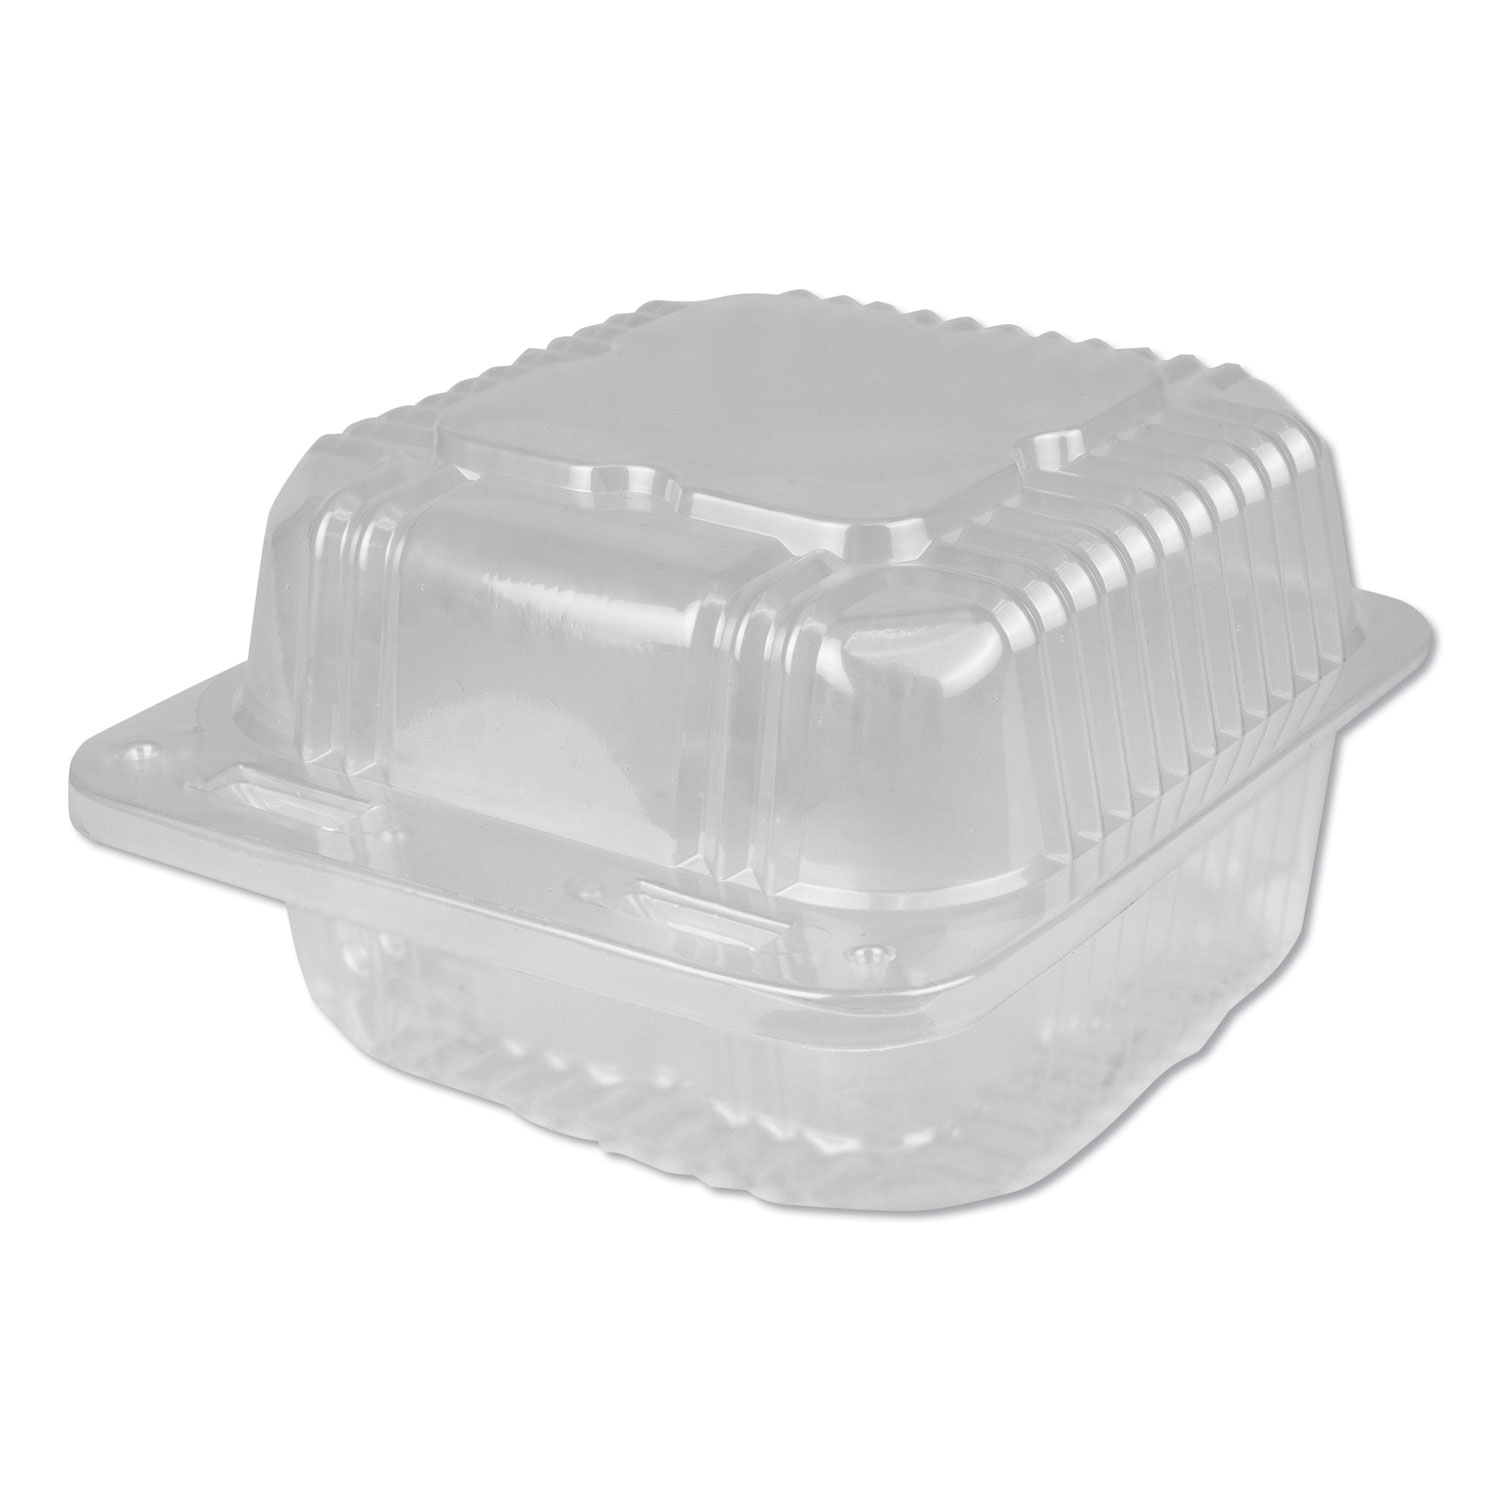 1 oz Sauce Containers with Hinged Lids - Divan Packaging